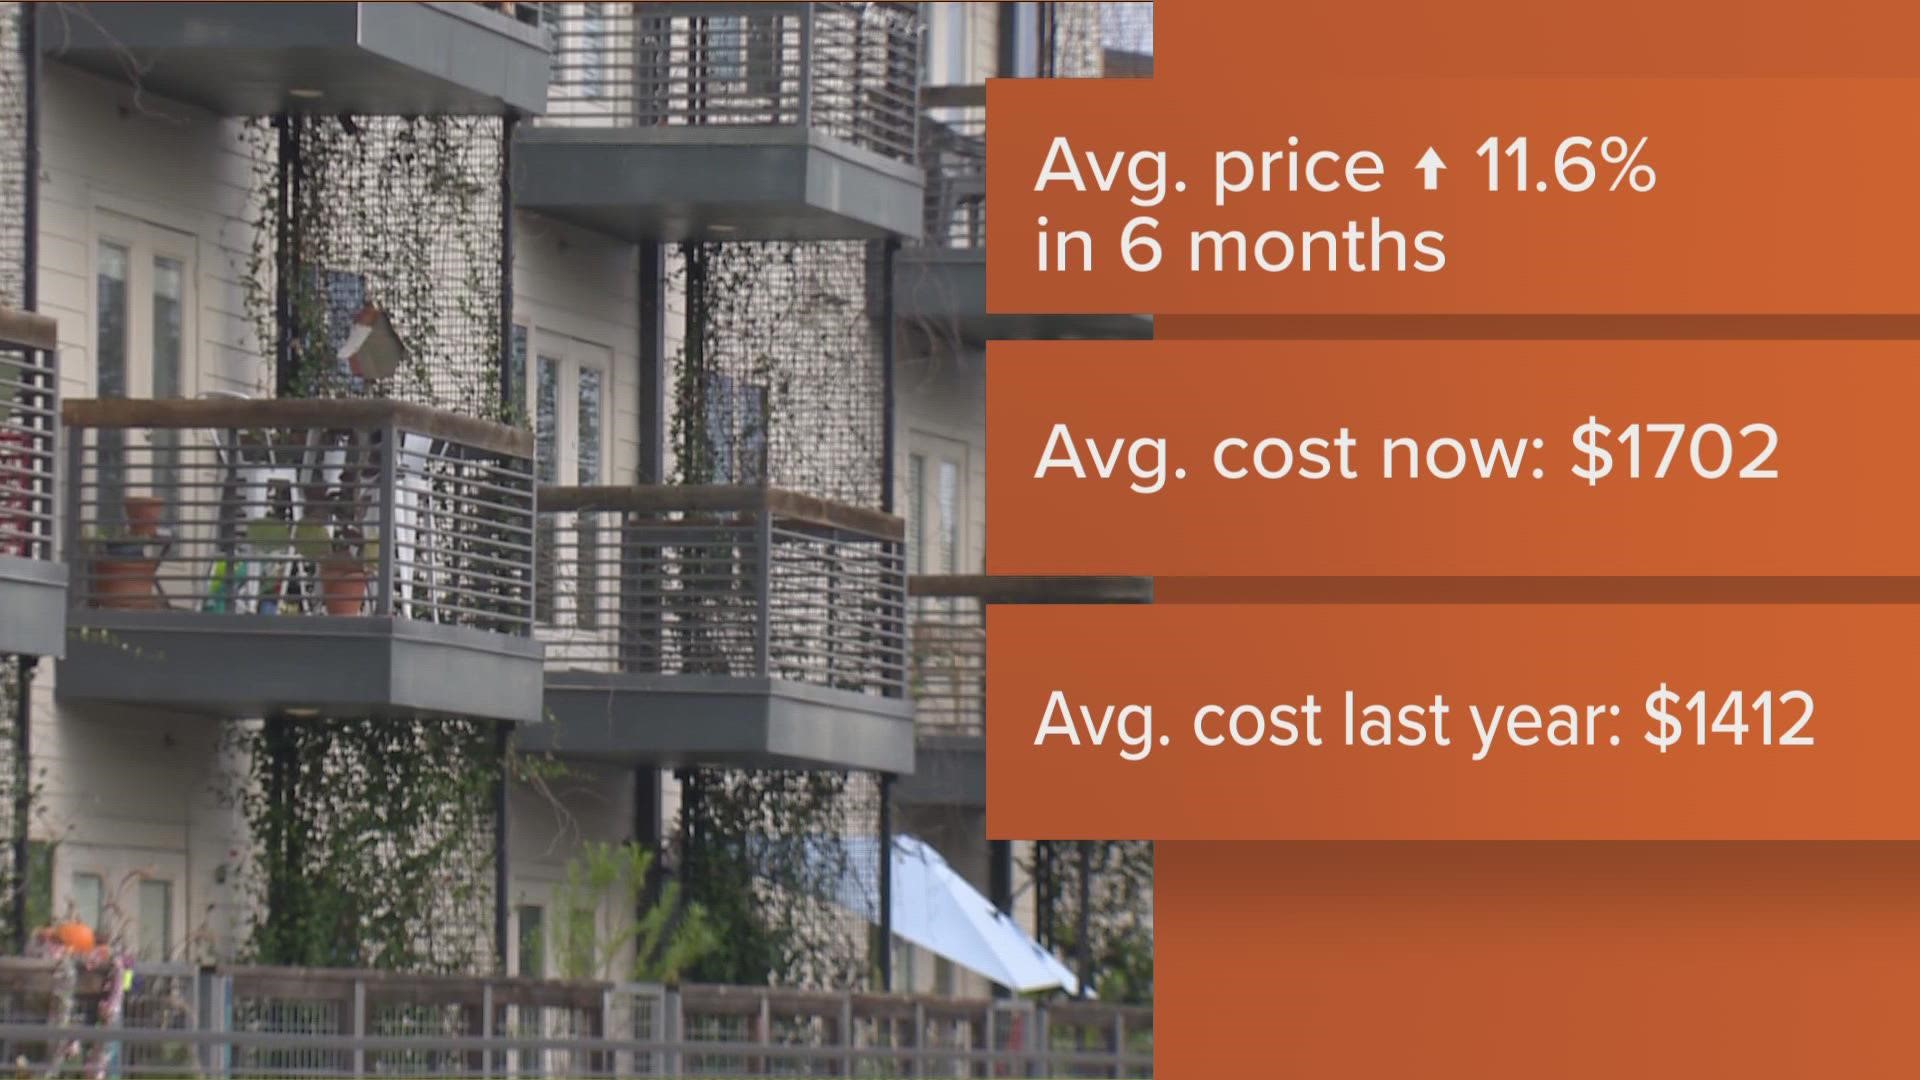 Experts say the cost of renting an apartment anywhere in Central Texas is at an all-time high.